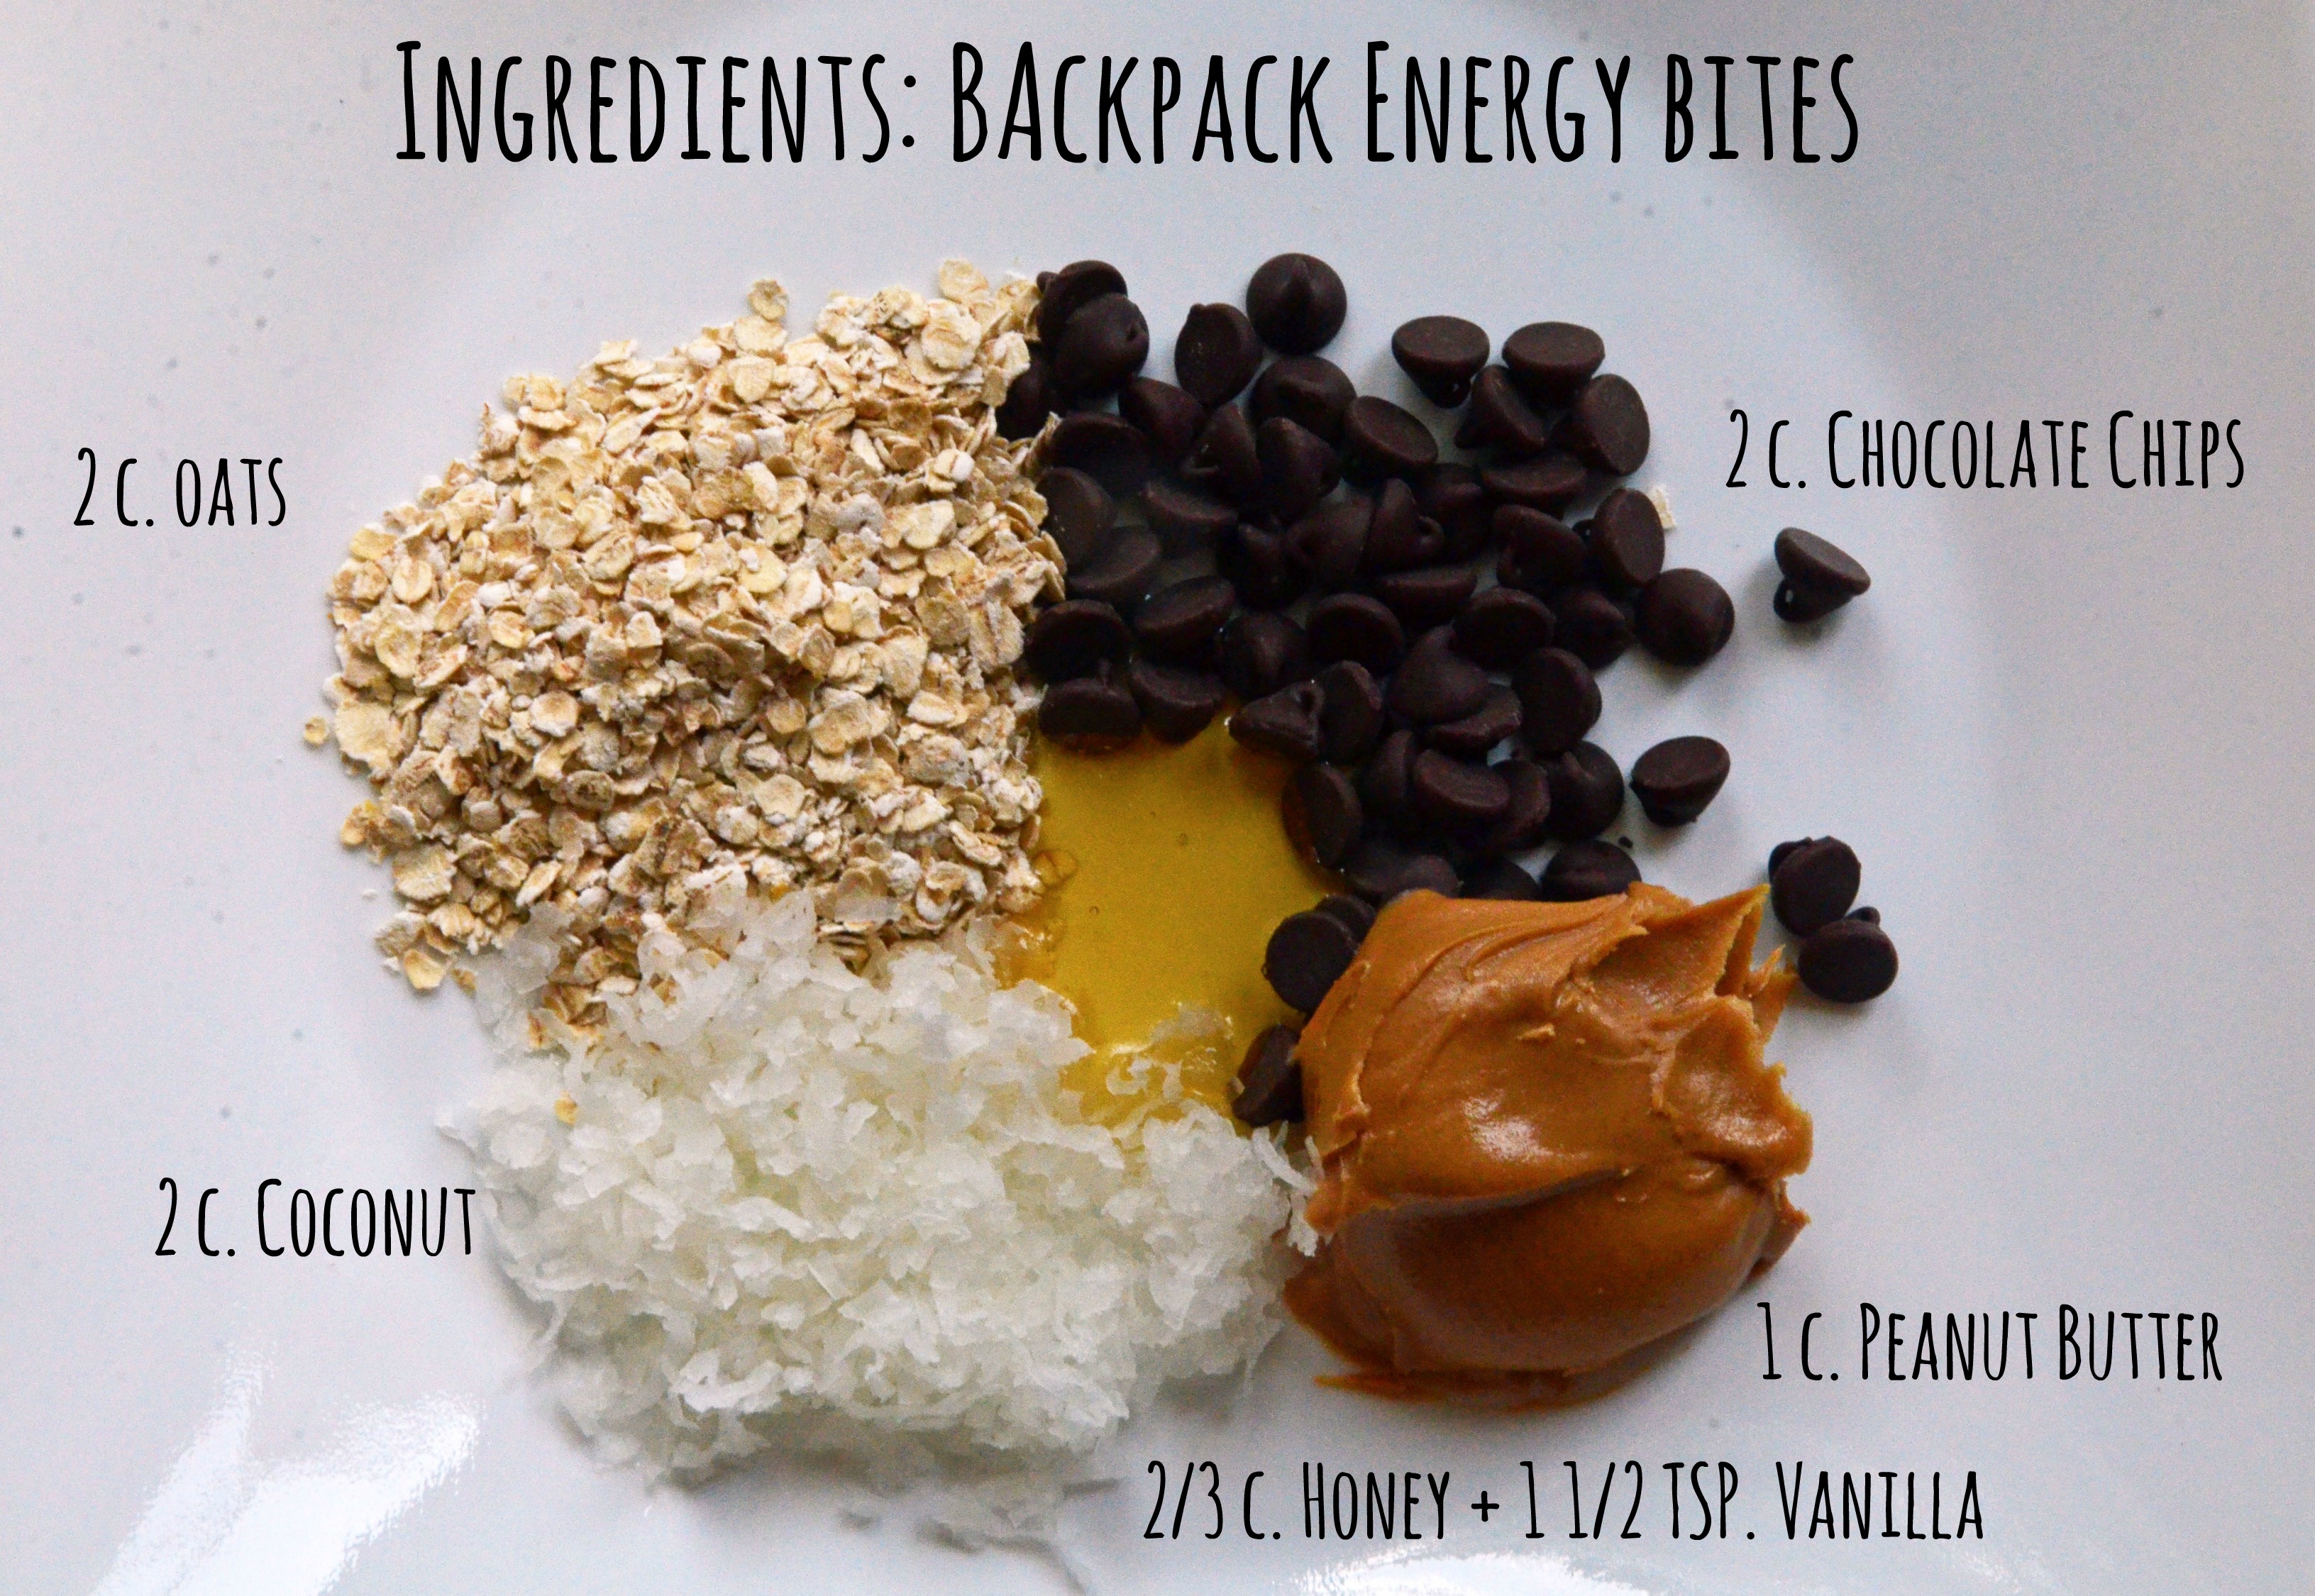 Backpack Energy Bites: Recipe for Camping, Backpacking and Roadtrips